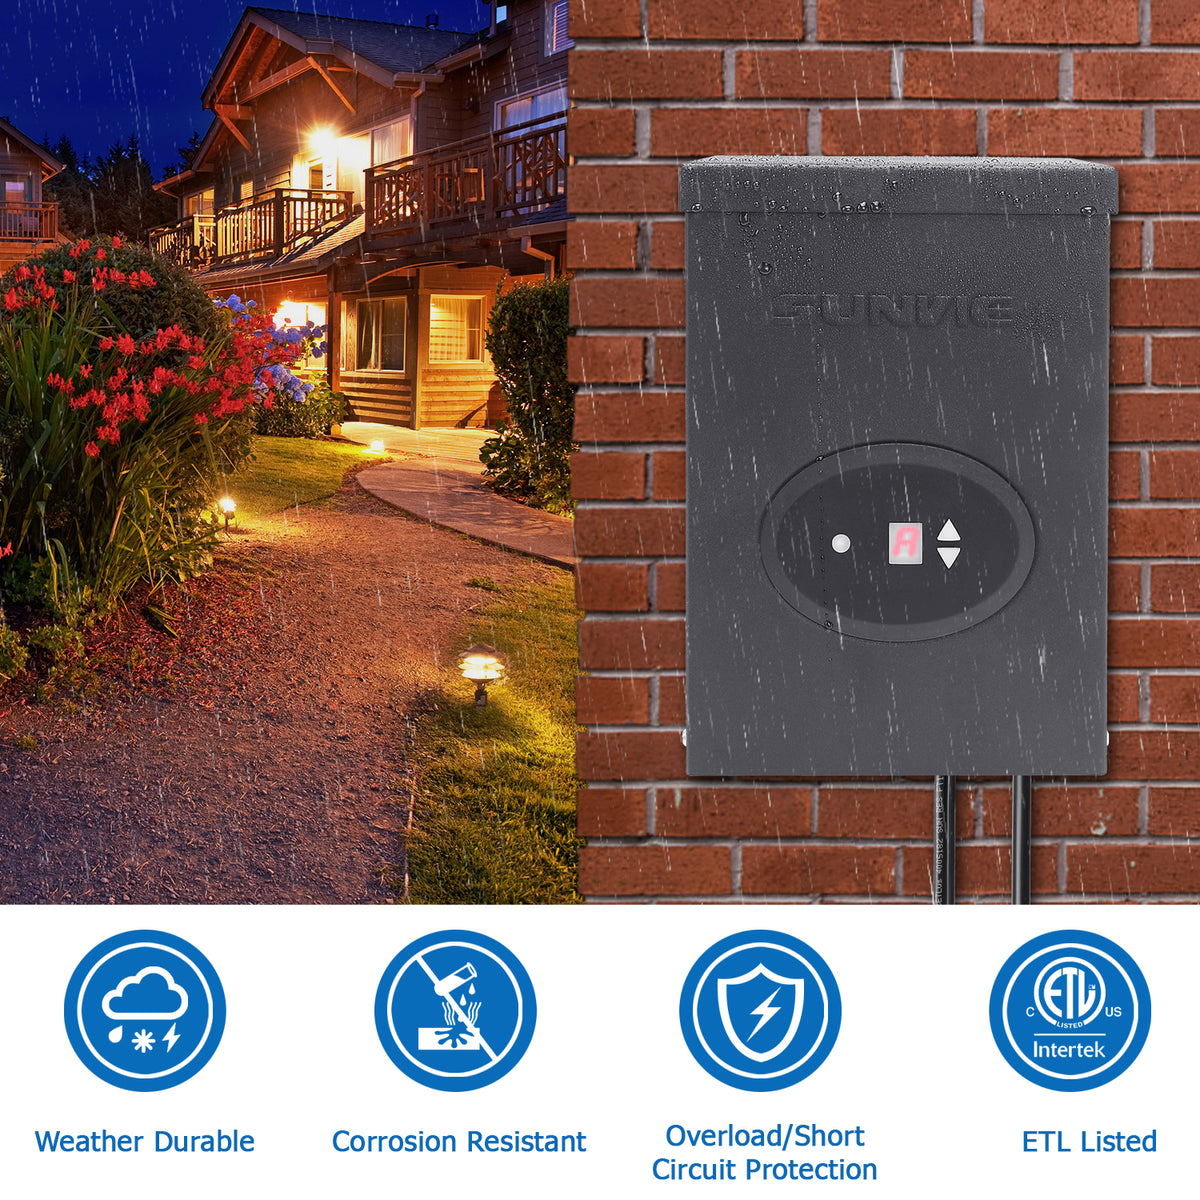 SUNVIE 300W Low Voltage Transformer for Landscape Lighting with Timer